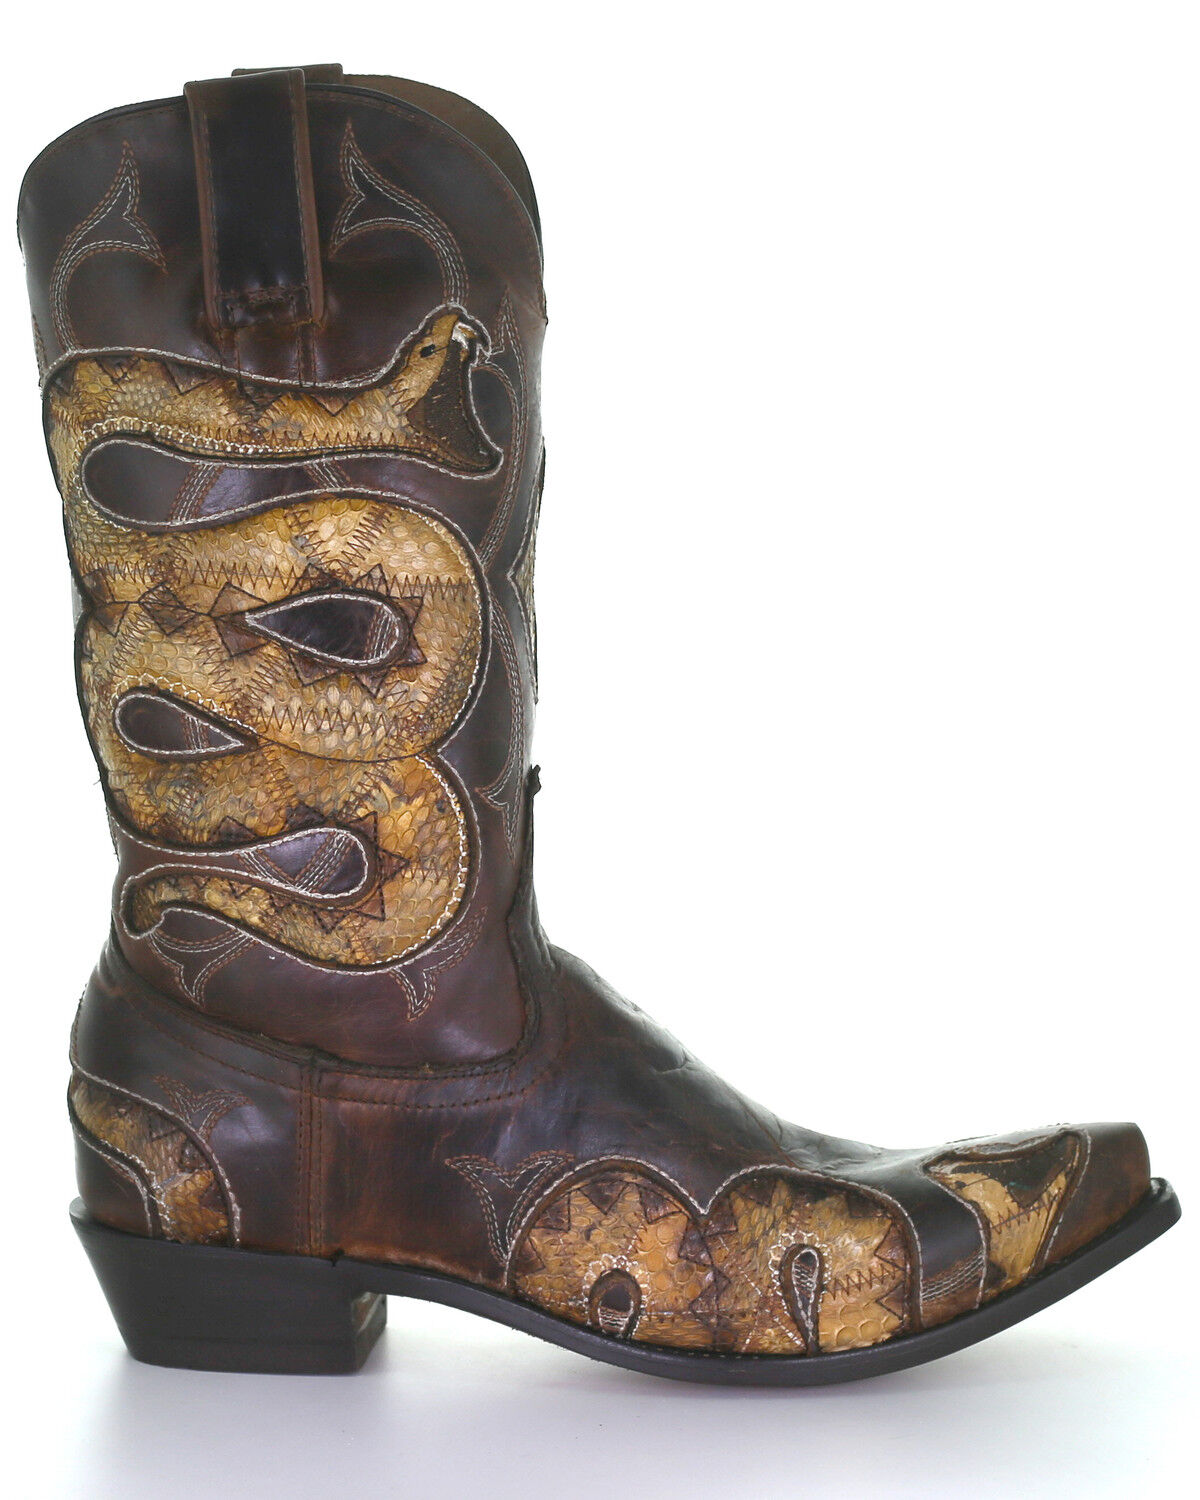 copperhead snake skin boots